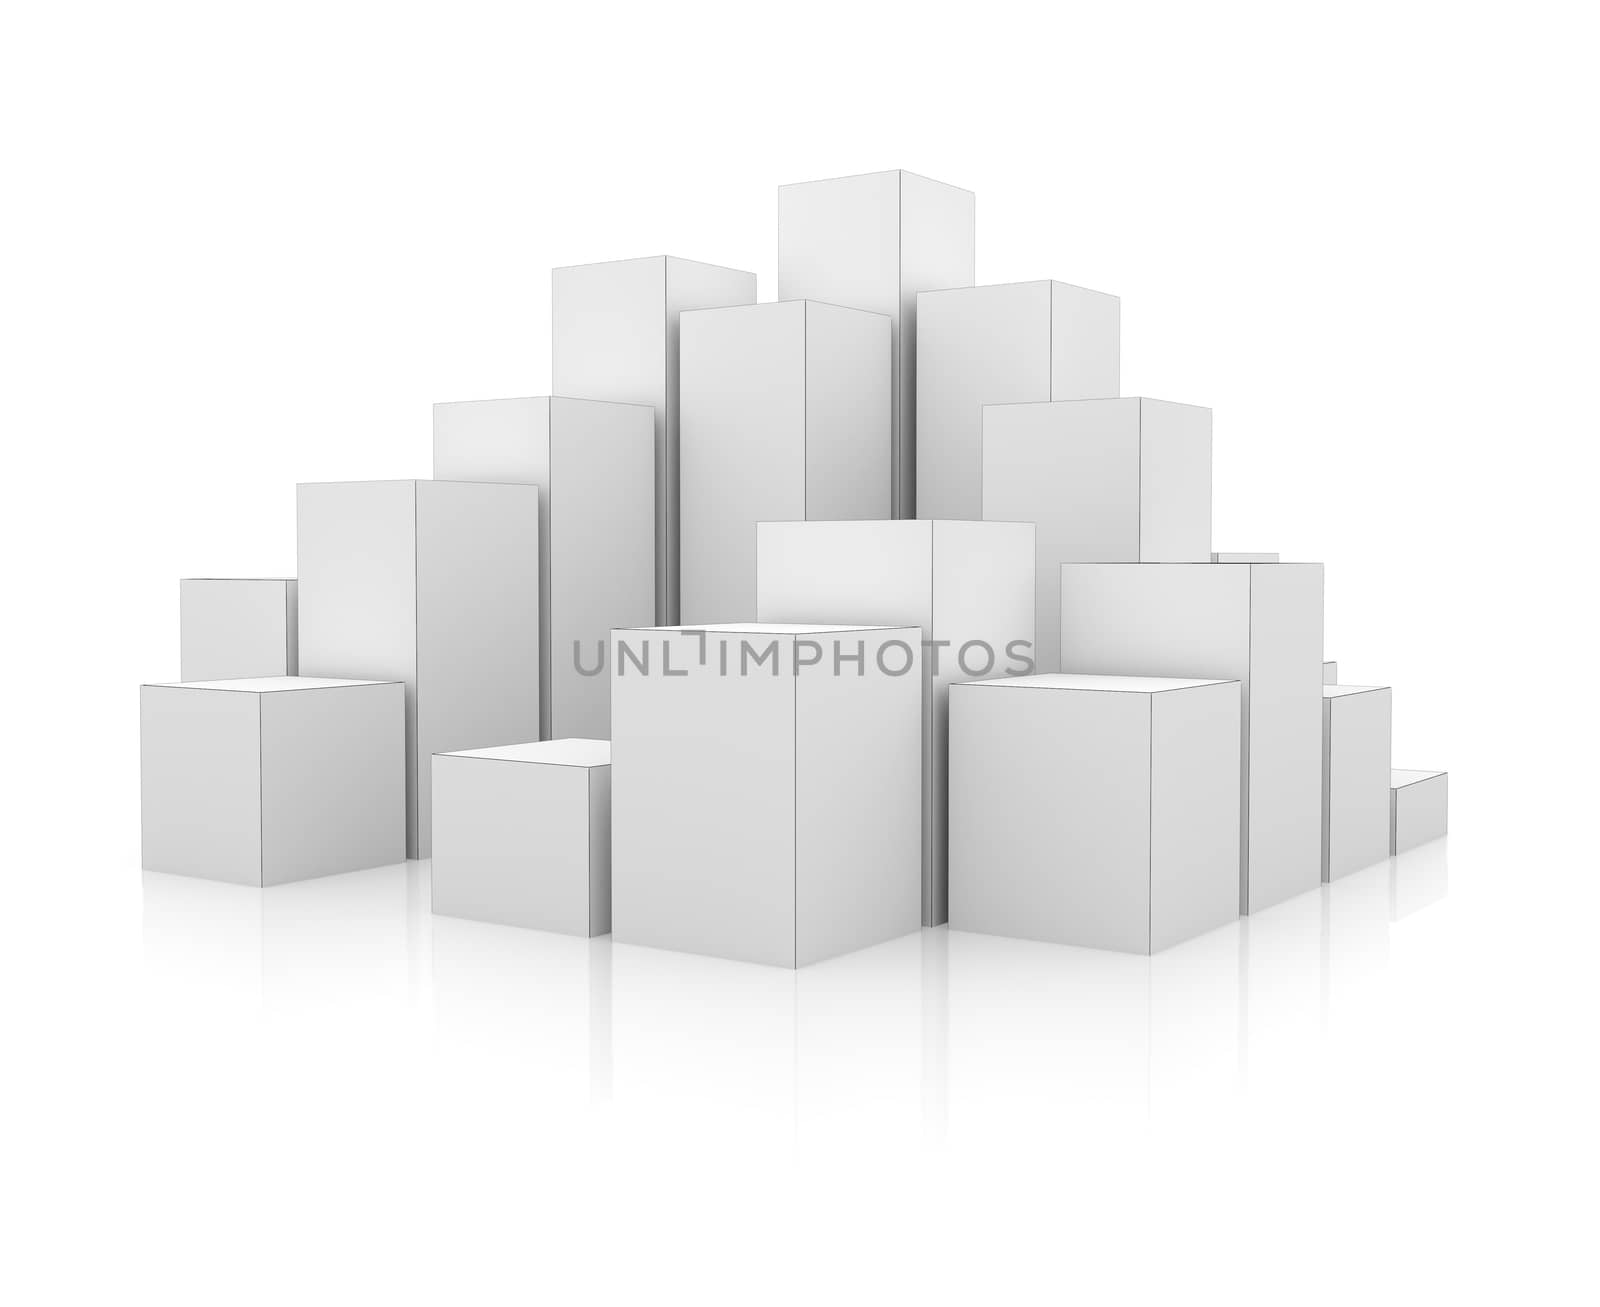 Abstract 3d illustration of white boxes. Isolated on white